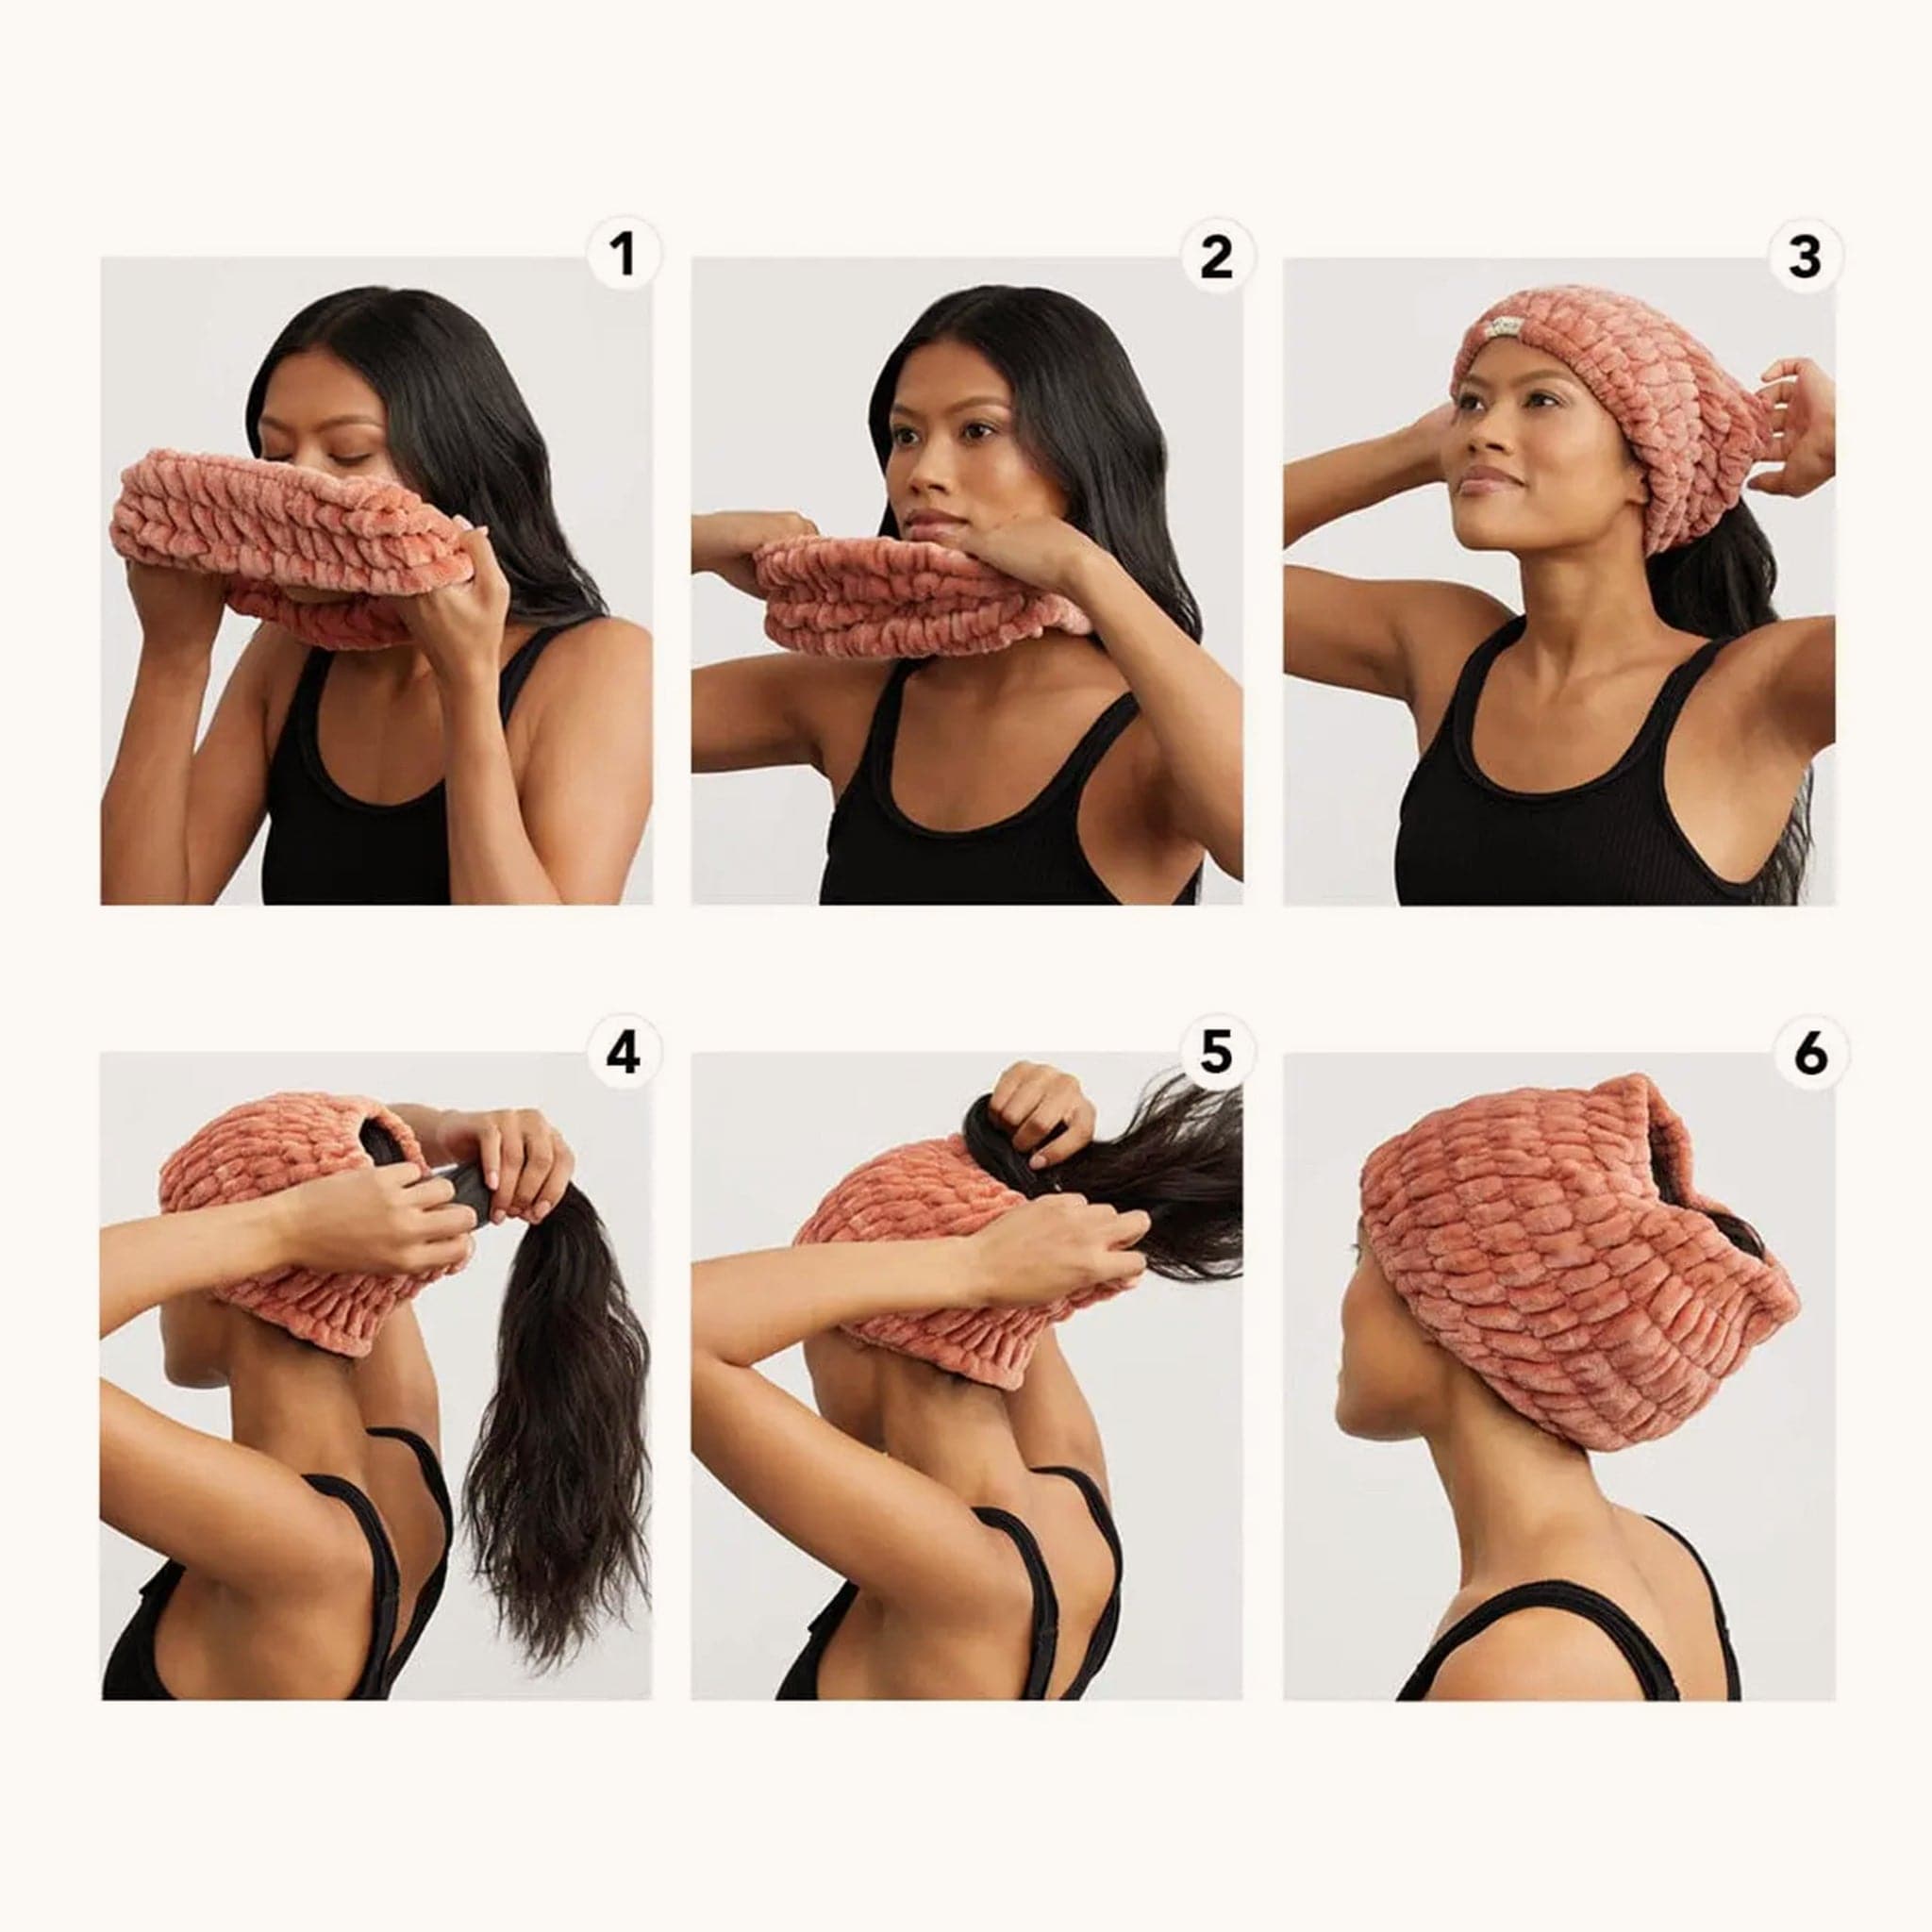 Six steps to pulling back hair in the headband. The first step starts with pulling the headband apart. The second is to pull over your head. The third is to pull over your face, pulling back all hair in the headband. The fourth step is to fashion the hair into a ponytail. The fifth is to tuck into the headband. The sixth and final step is to position the headband so it is comfortable. 